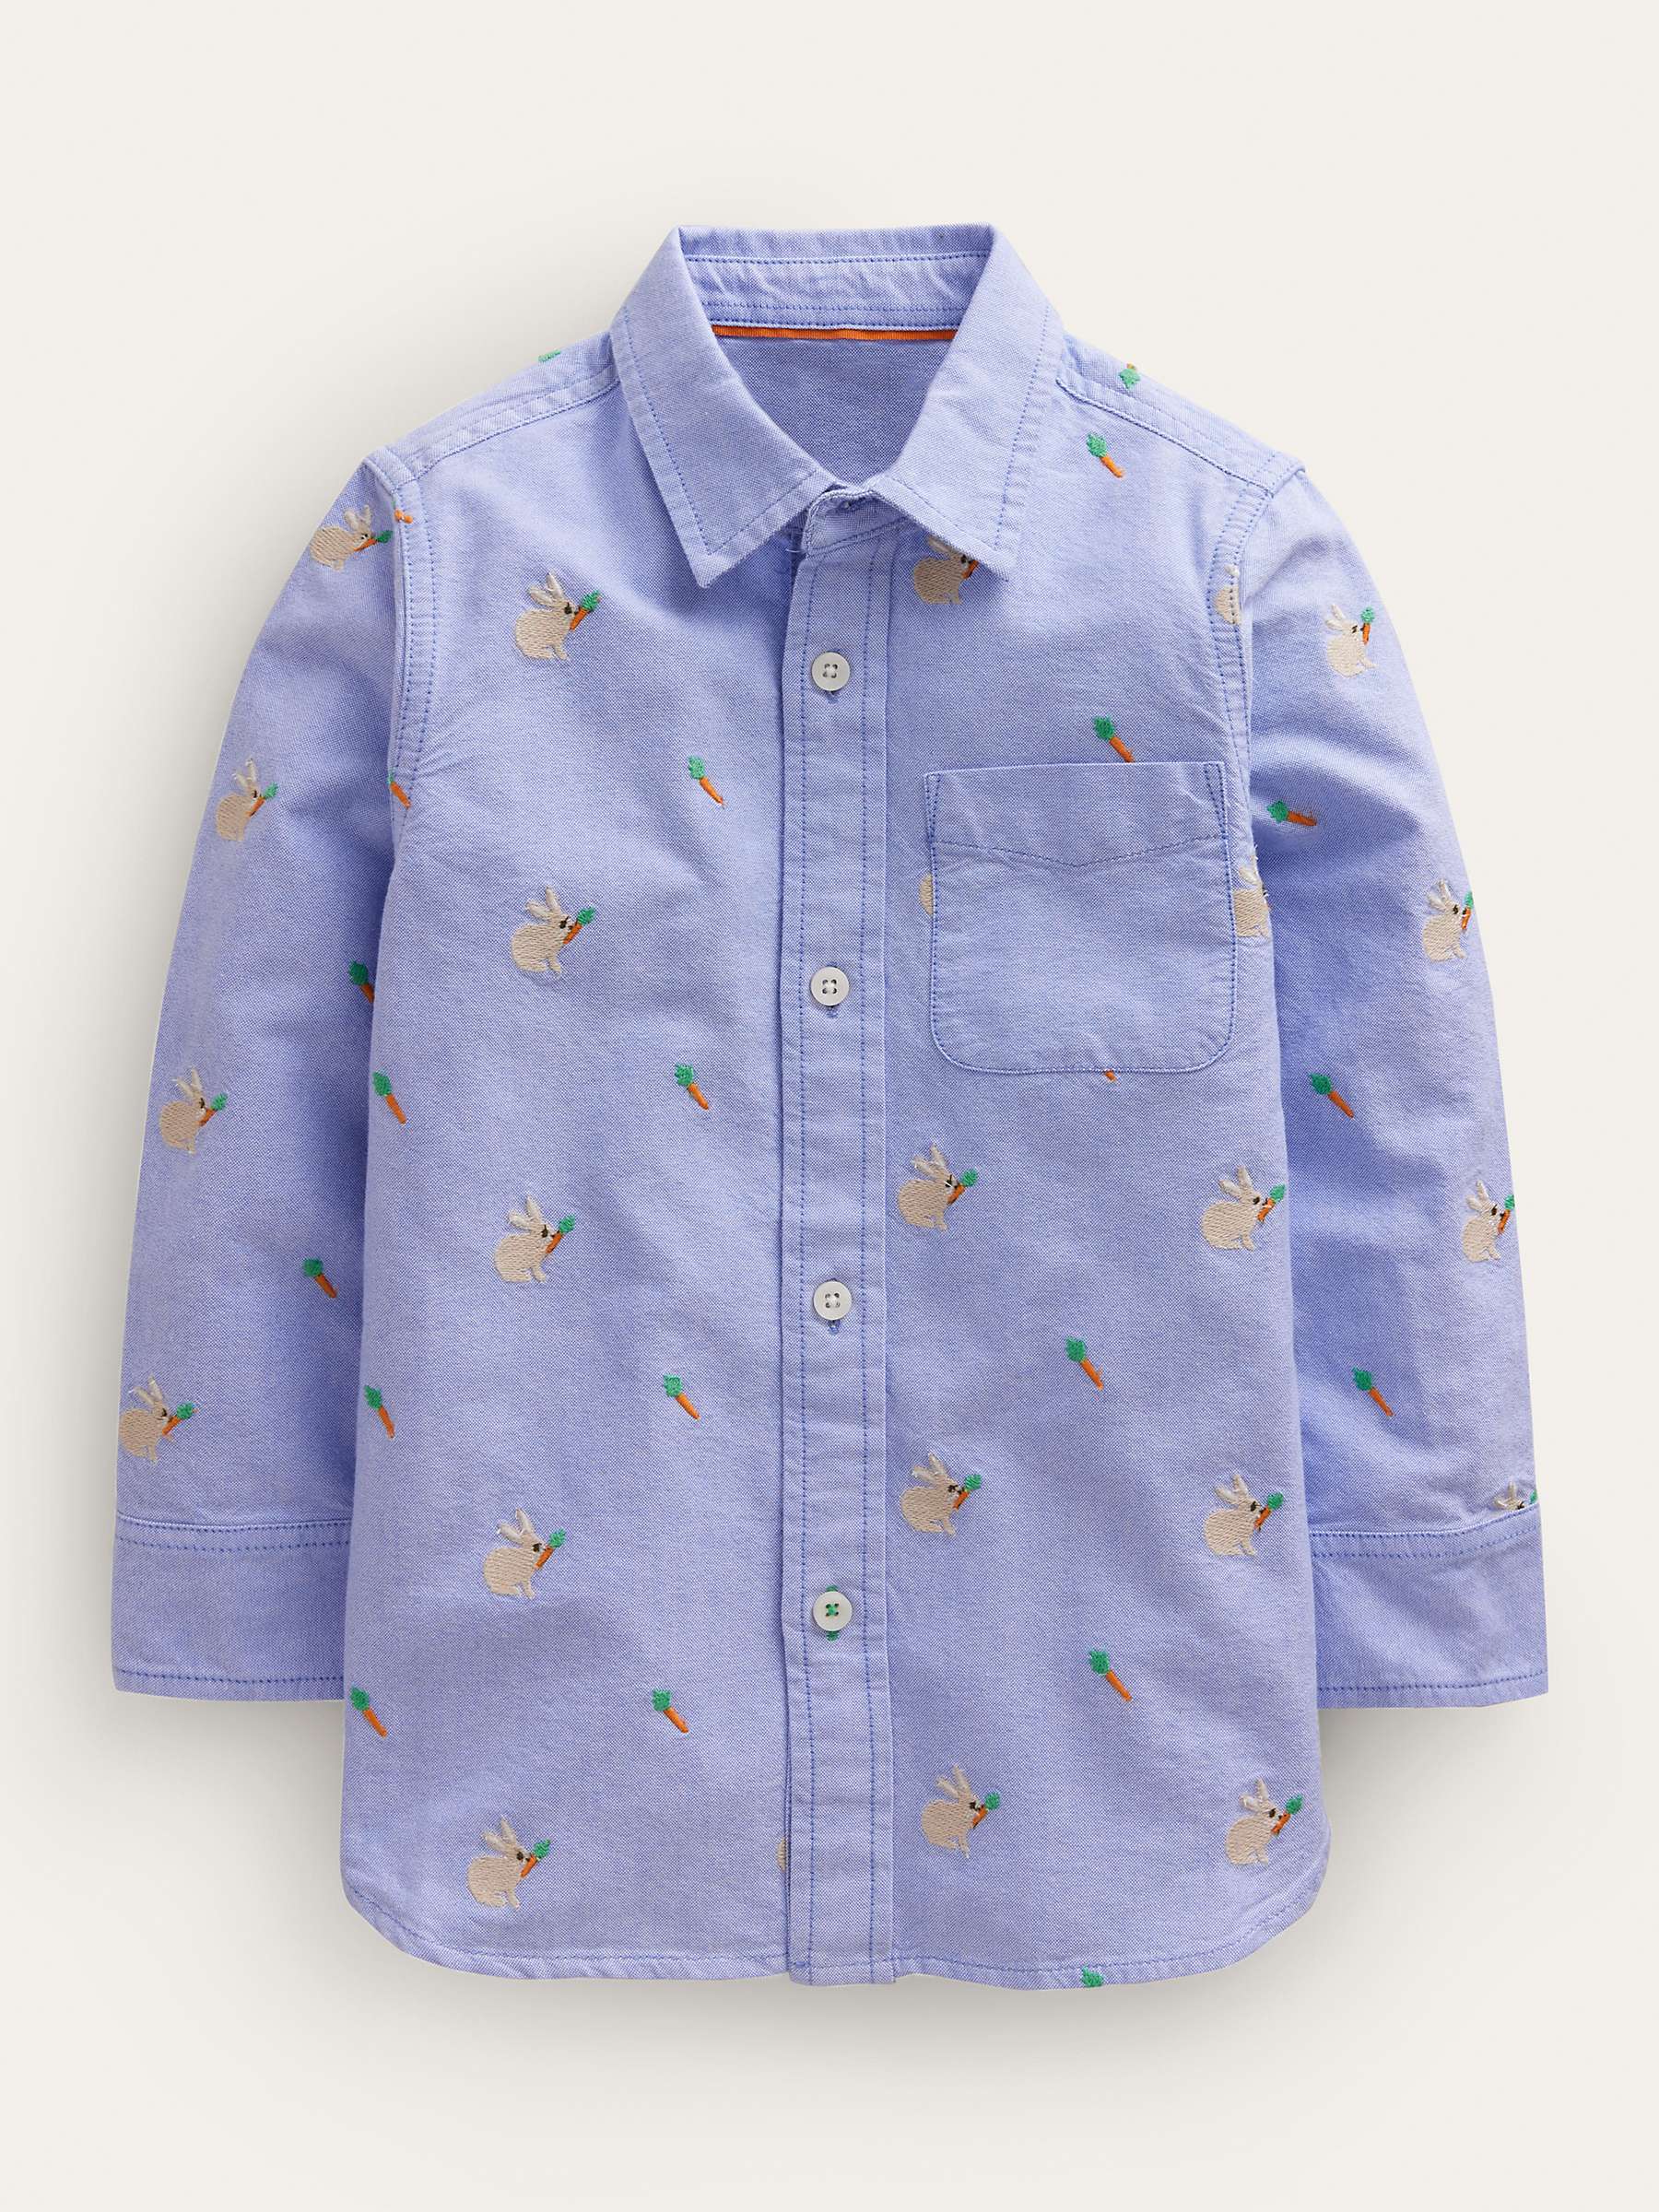 Buy Mini Boden Kids' Embroidered Bunny Oxford Shirt, Blue Online at johnlewis.com